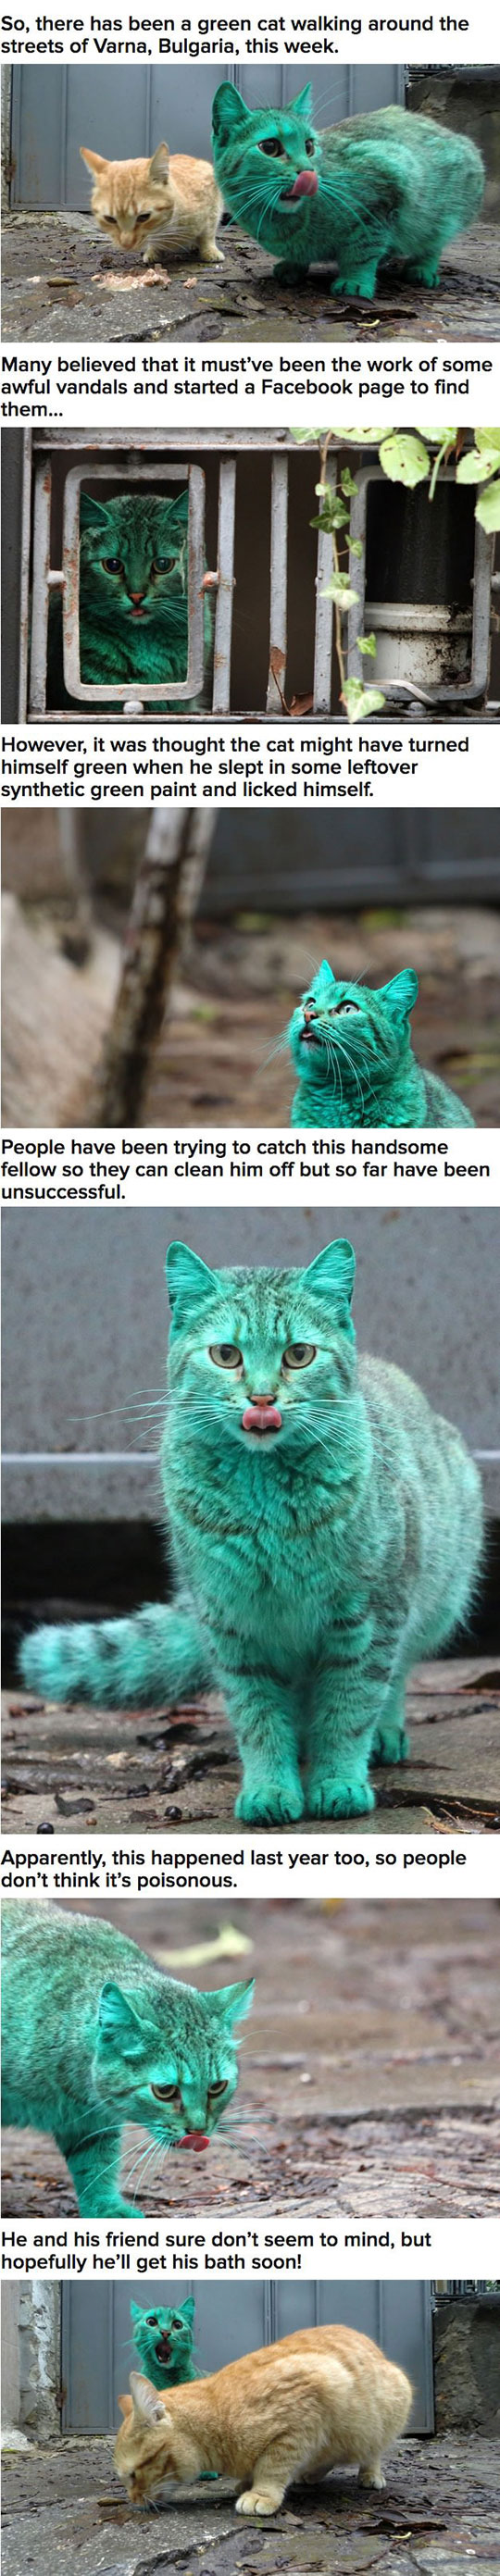 When green cats invade